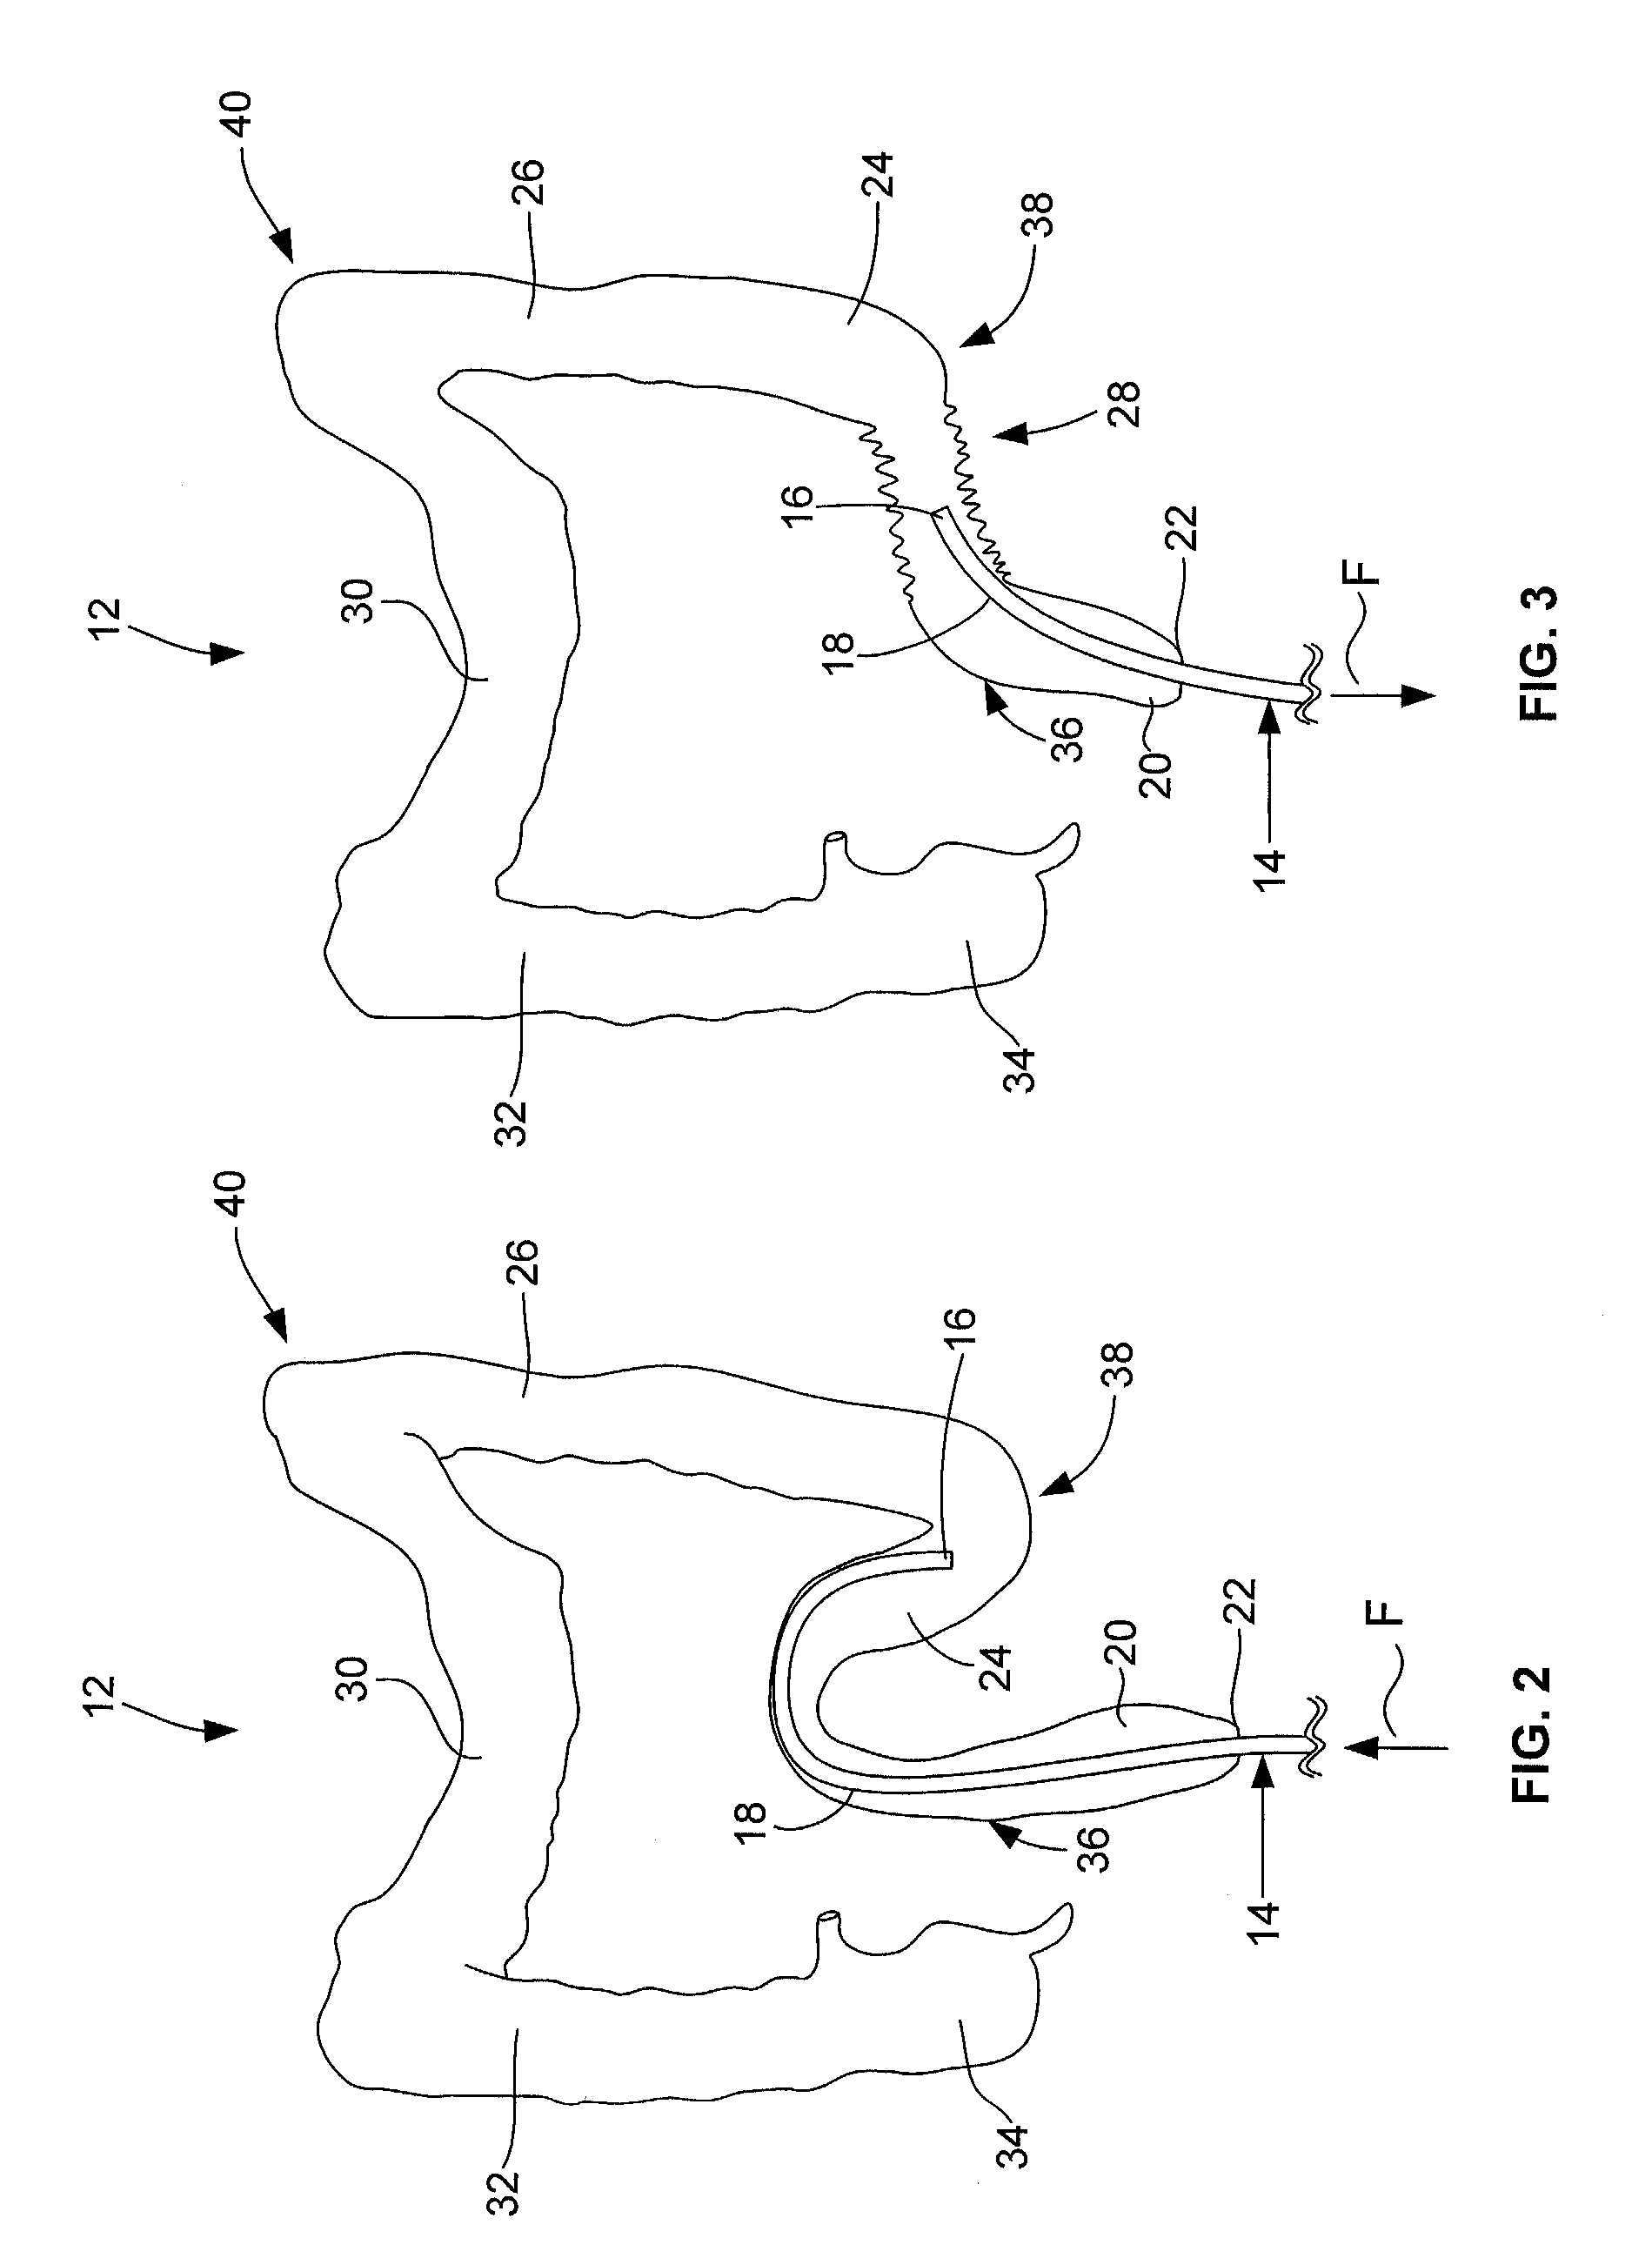 Colonoscope Guide and Method of Use for Improved Colonoscopy